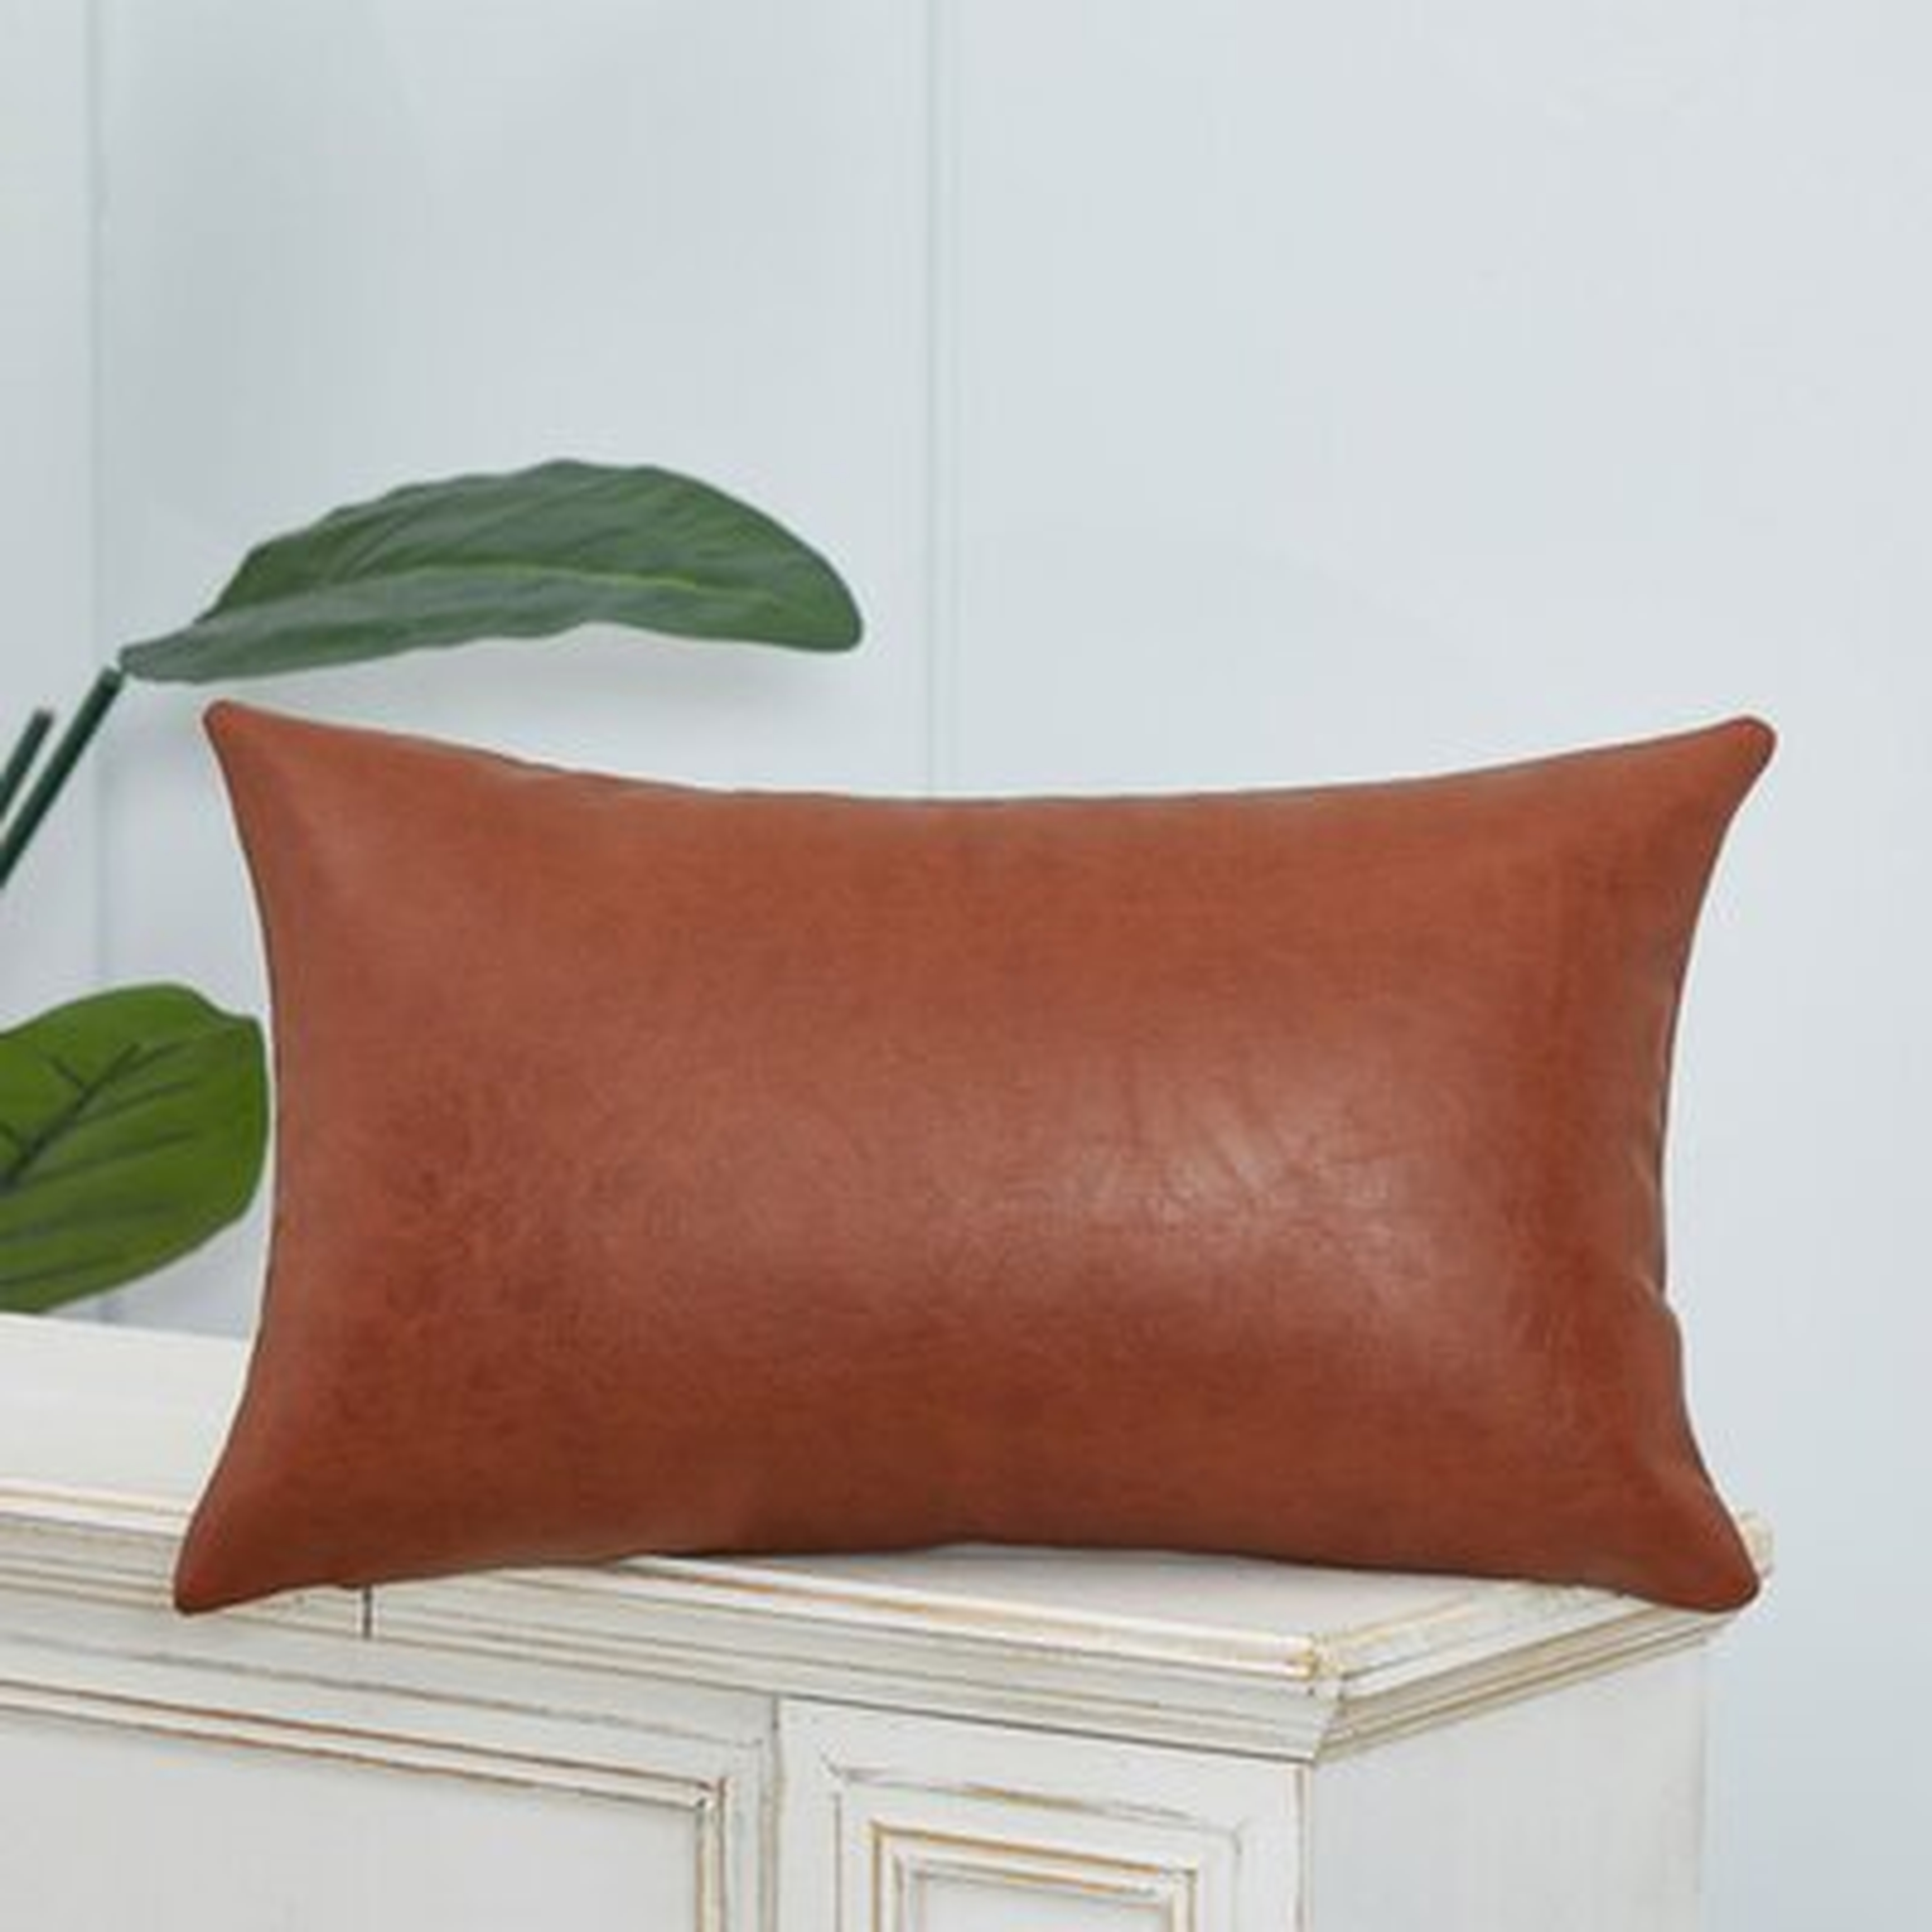 Faux Leather Decorative Throw Pillow Cover For Couch Car (Set Of 1) - Wayfair